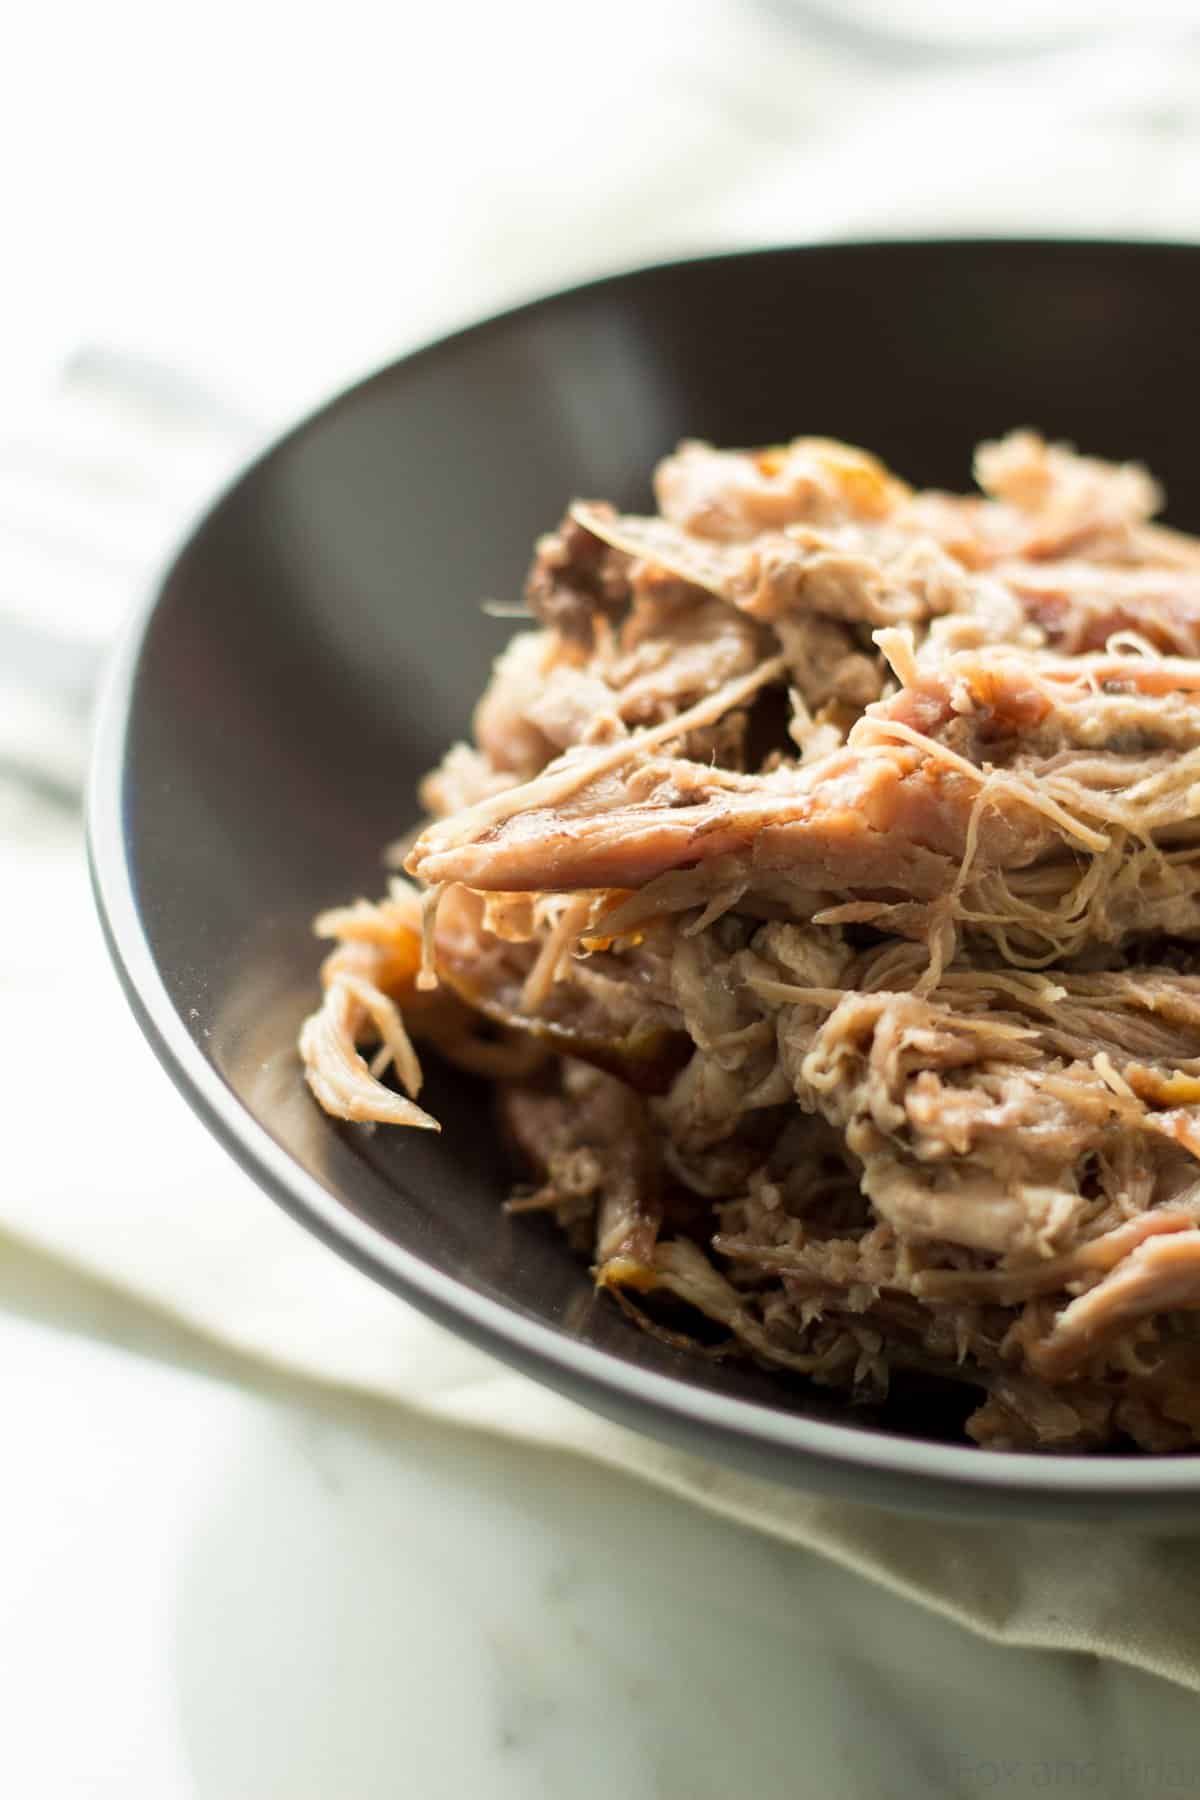 This is the easiest slow cooker pulled pork, but it tastes unbelievable! Make a huge batch and freeze some of it to put on sandwiches or pizza, in soup, tacos, fried rice and more!